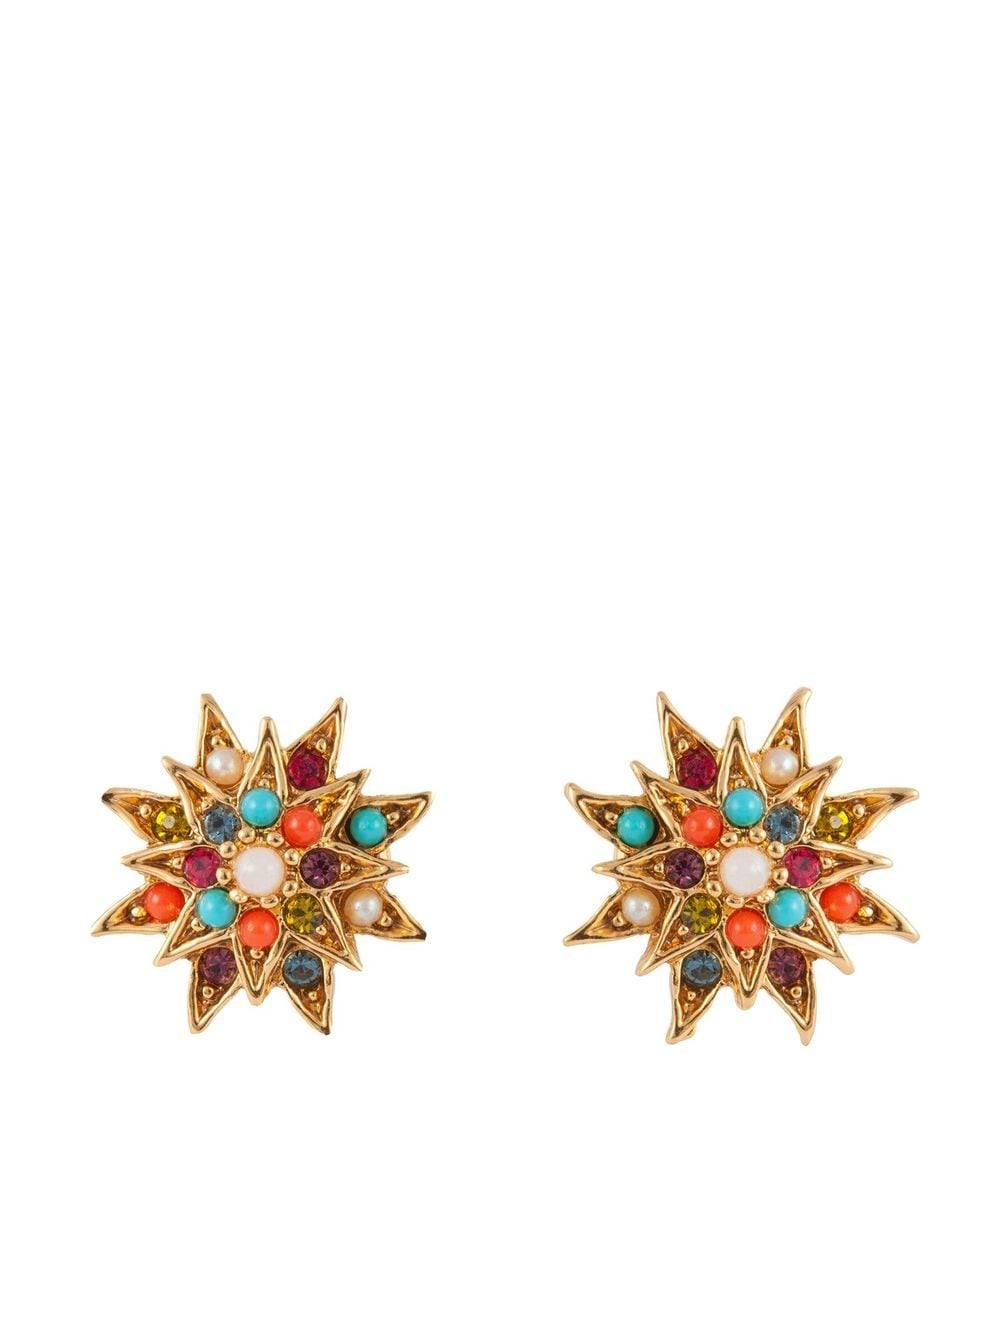 x D'orlan 1980s crystal-embellished earrings